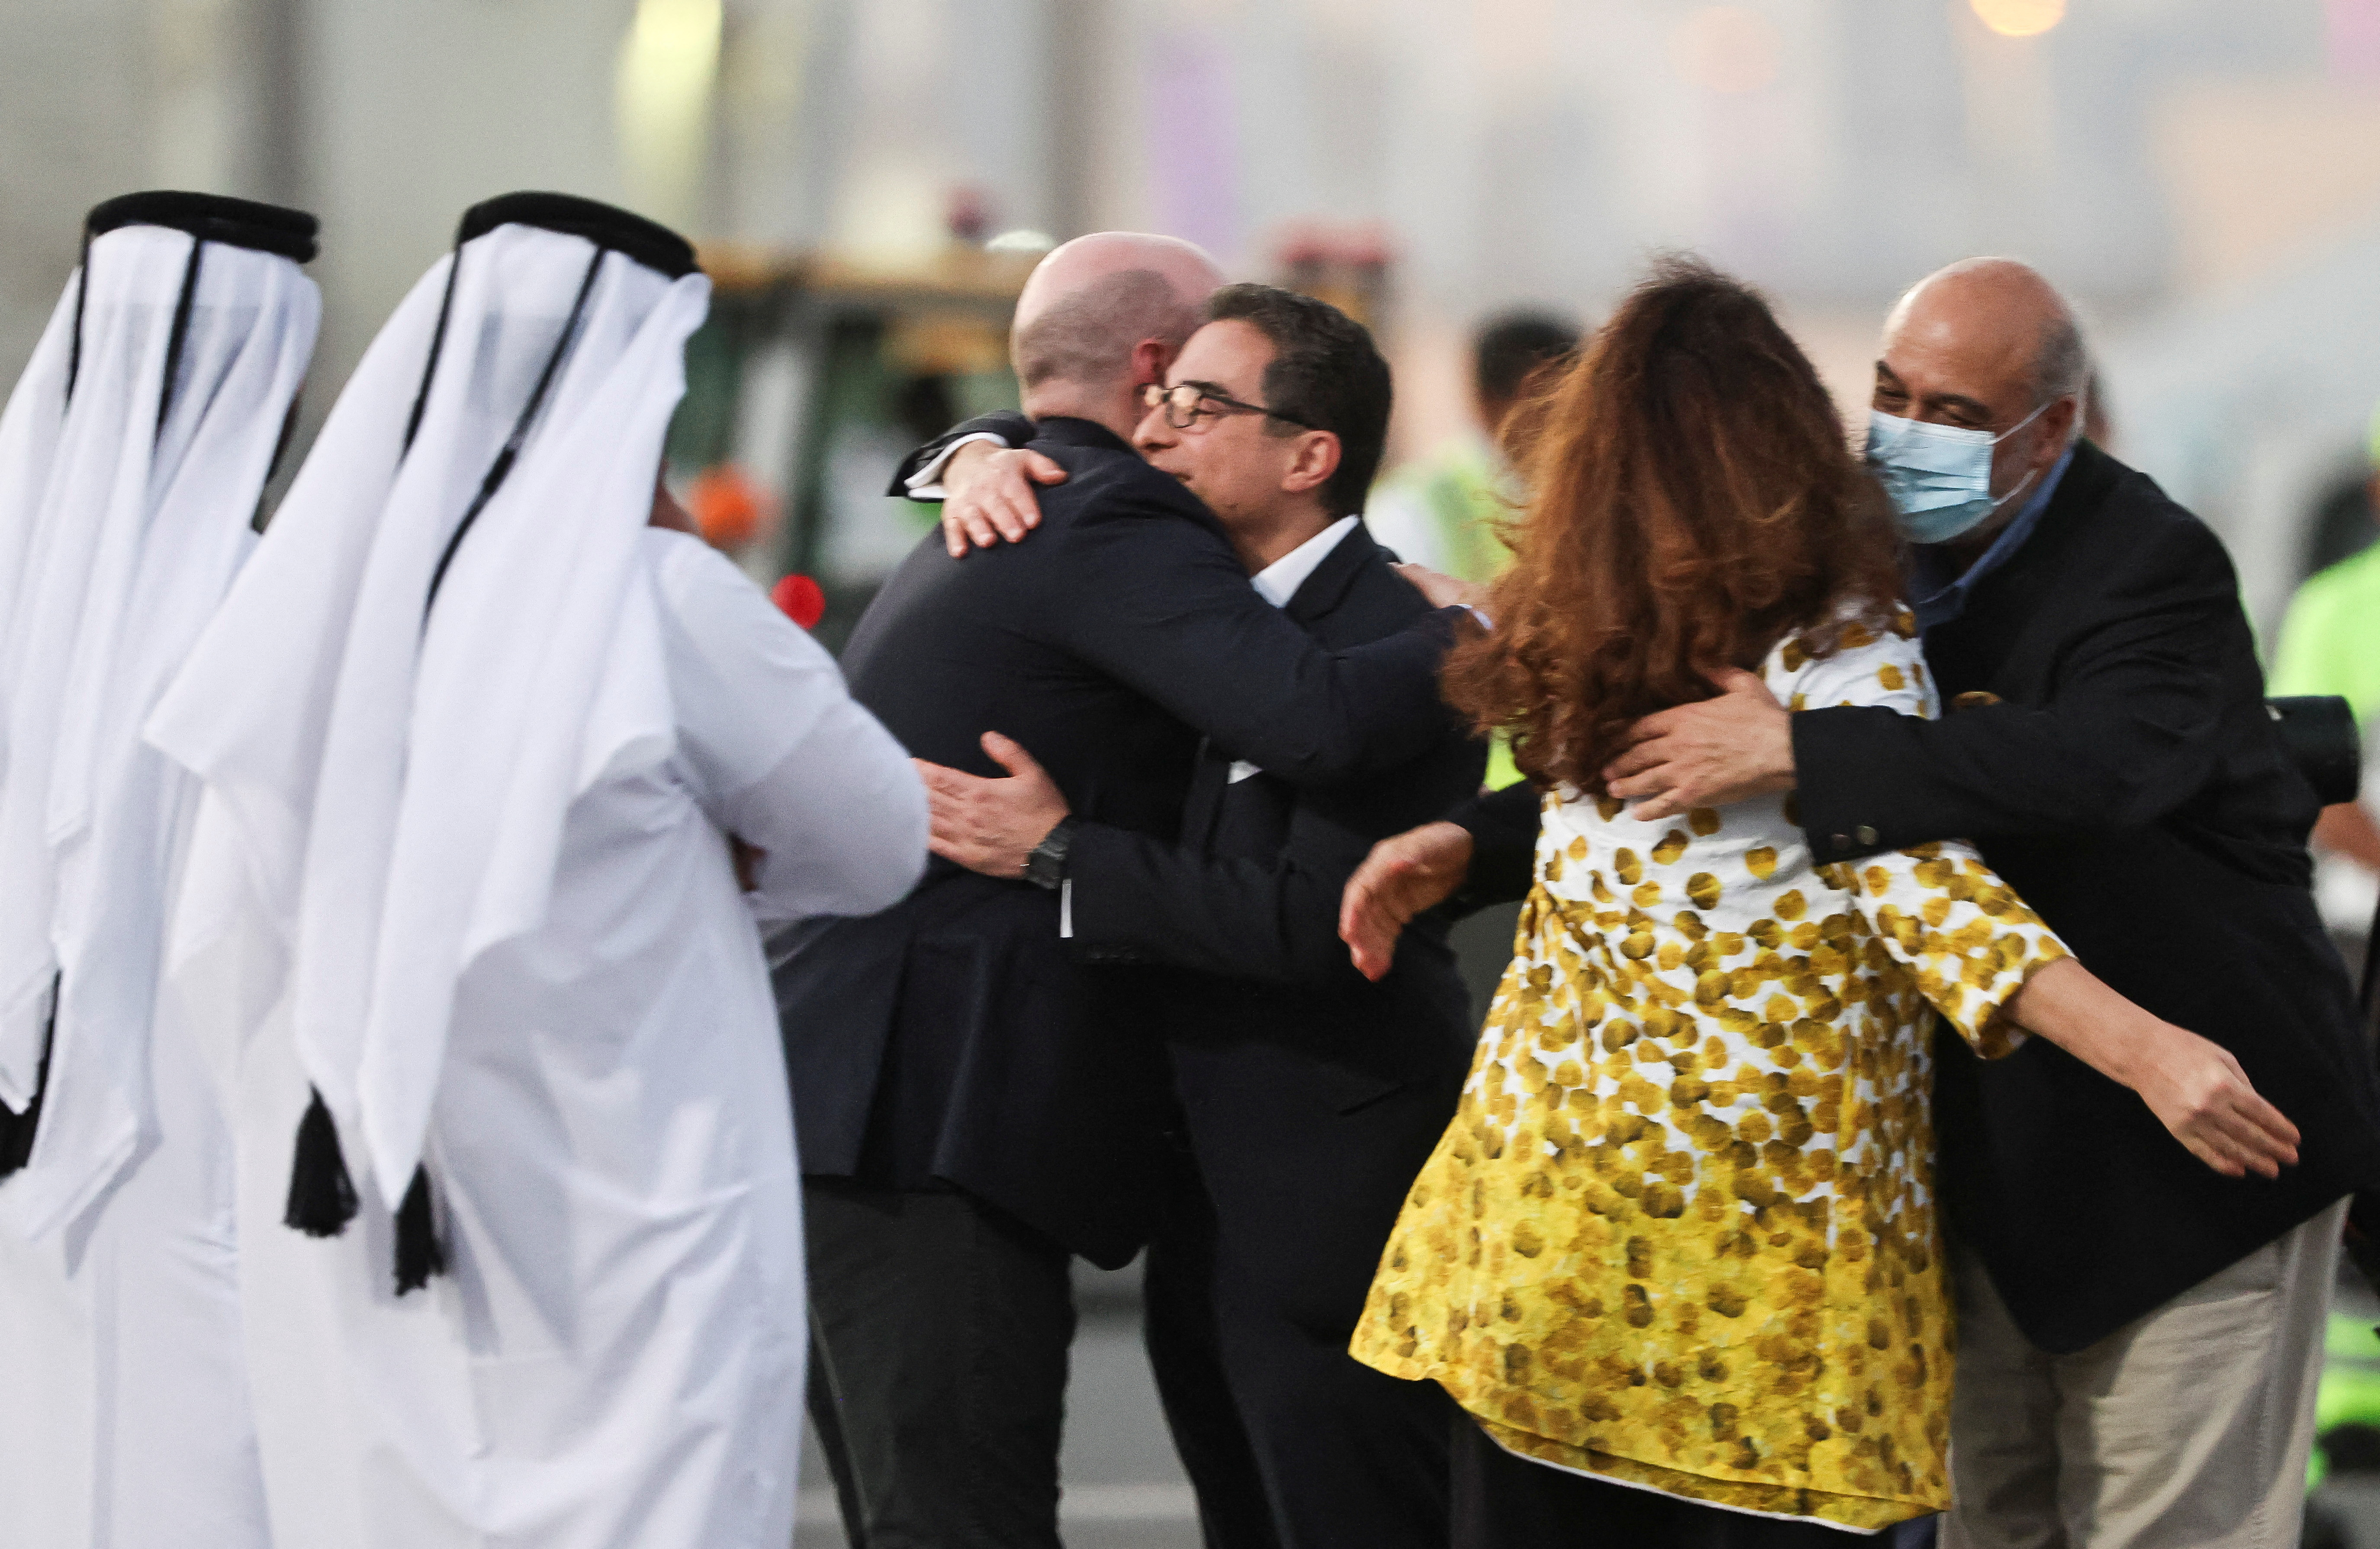 Americans released in a swap deal between the U.S. and Iran arrive in Doha